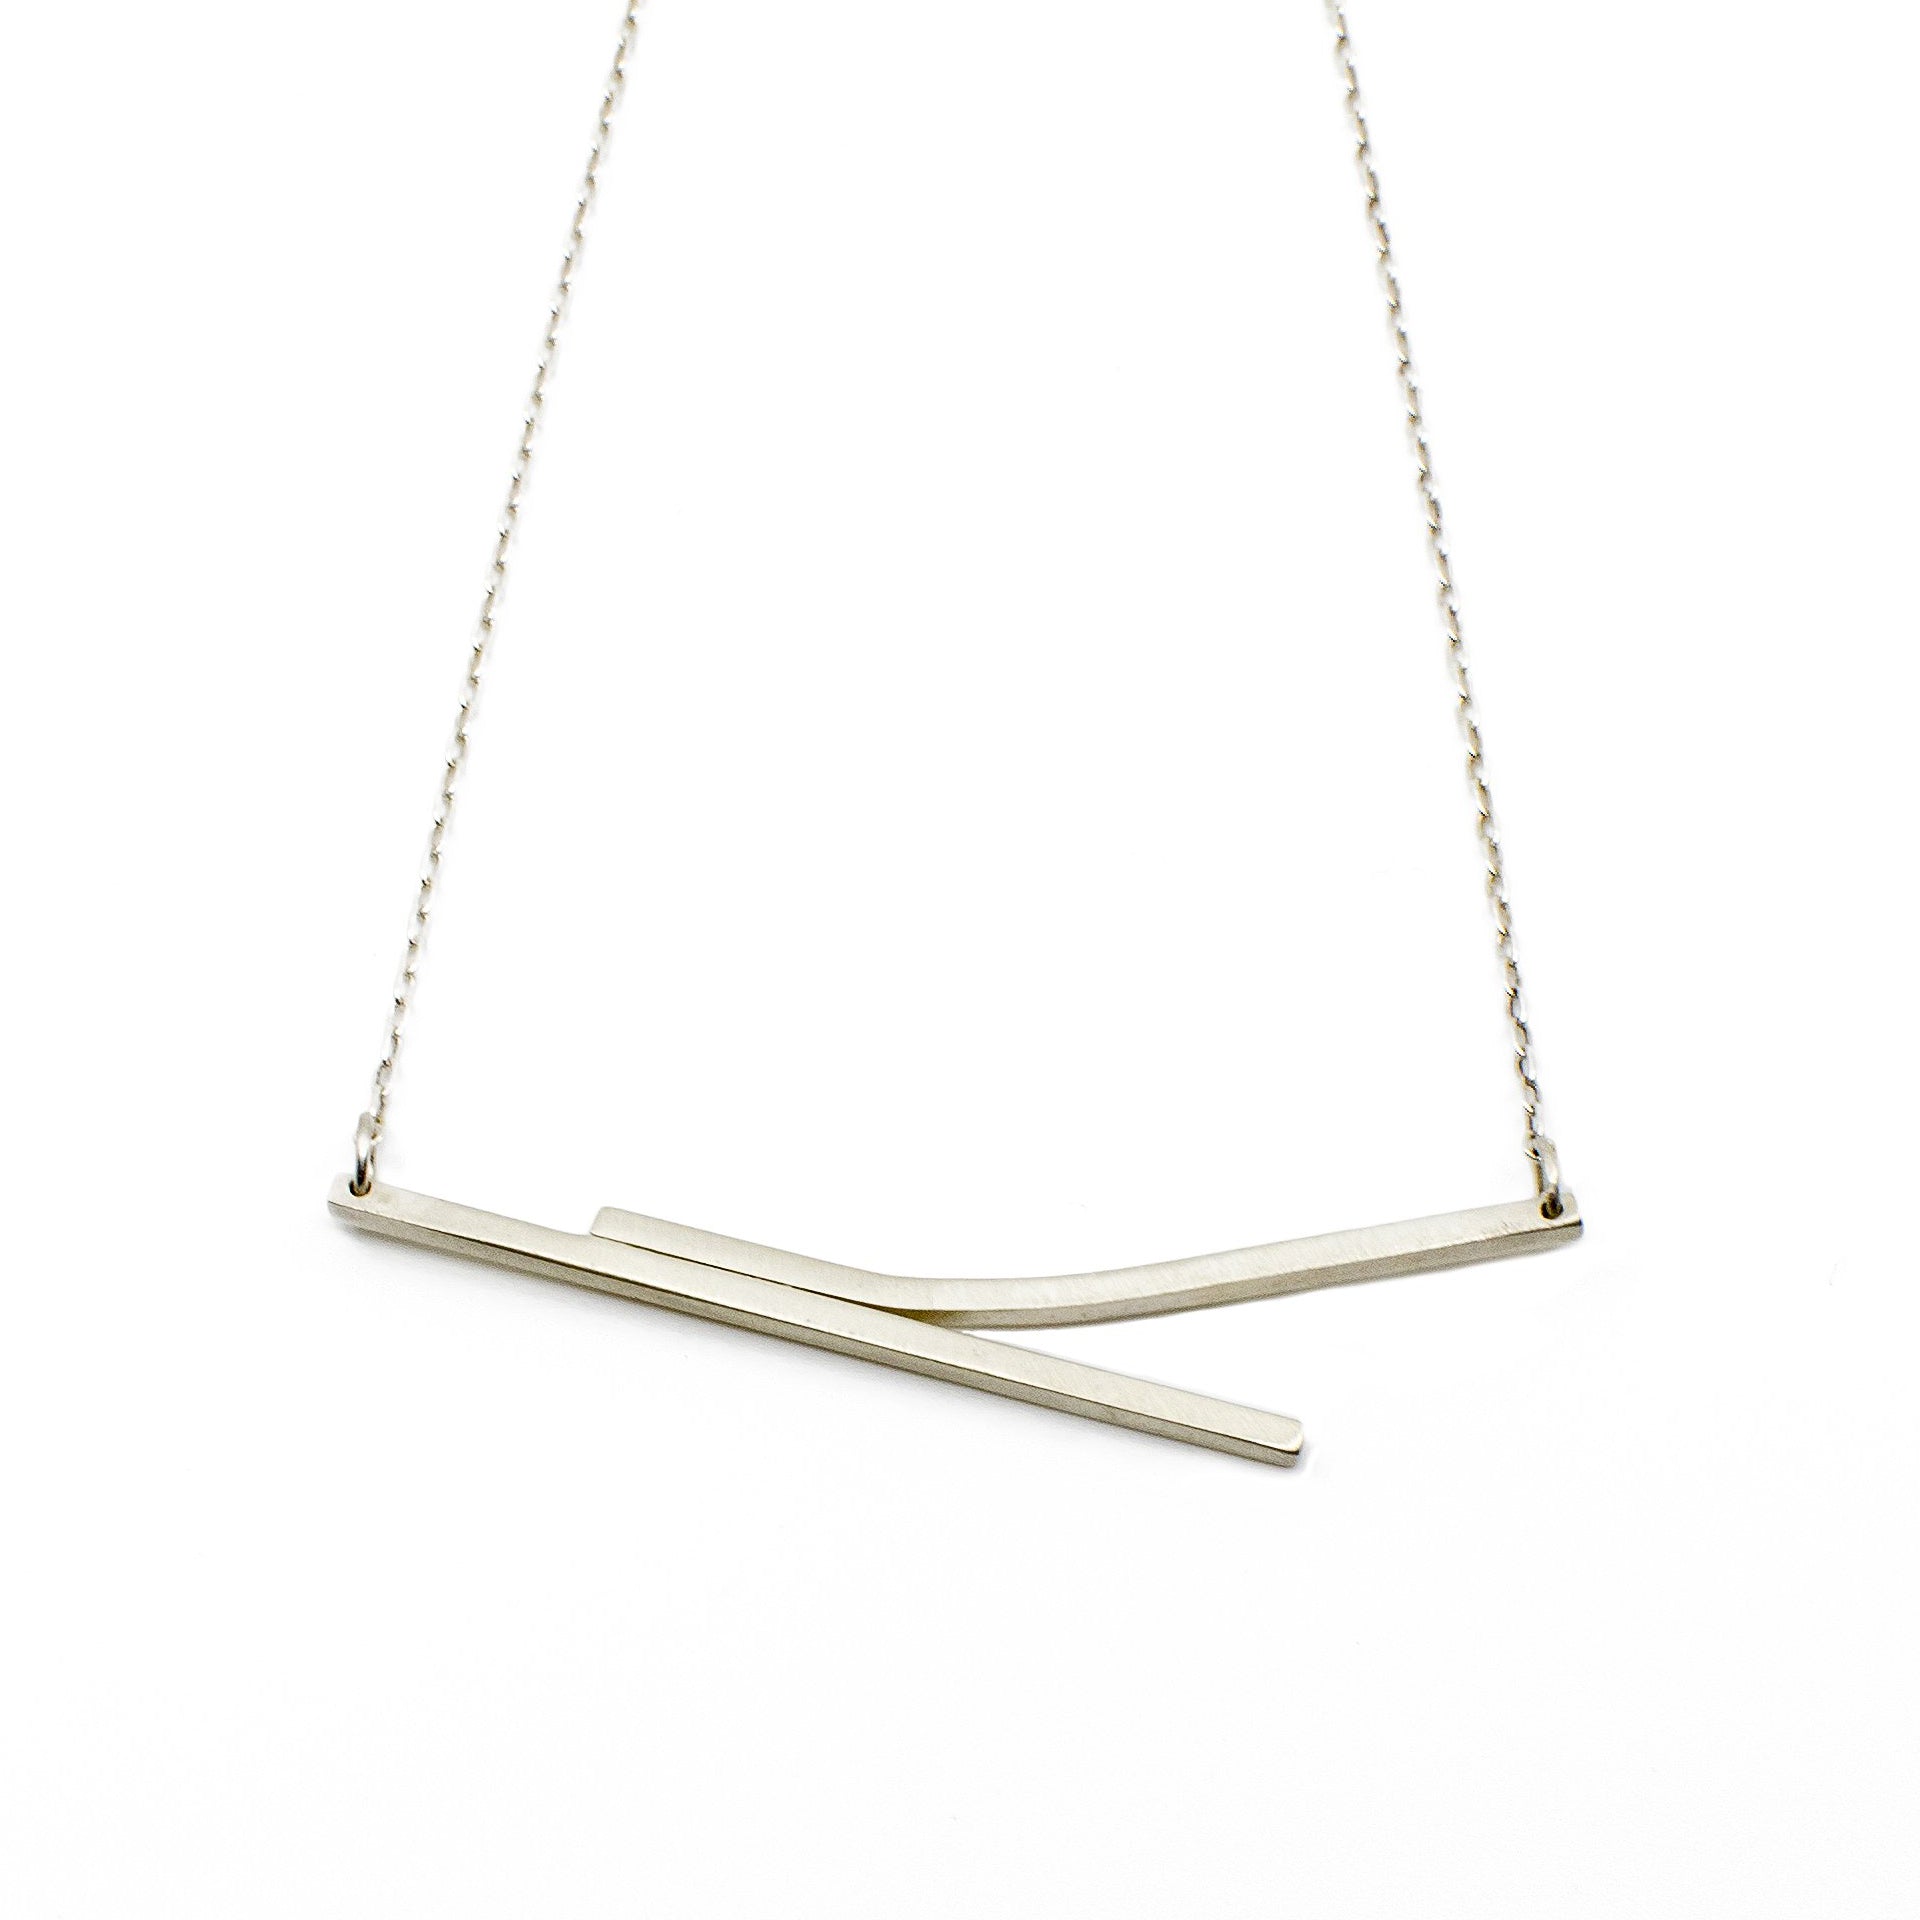 Lines 2 Necklace - Sterling Silver